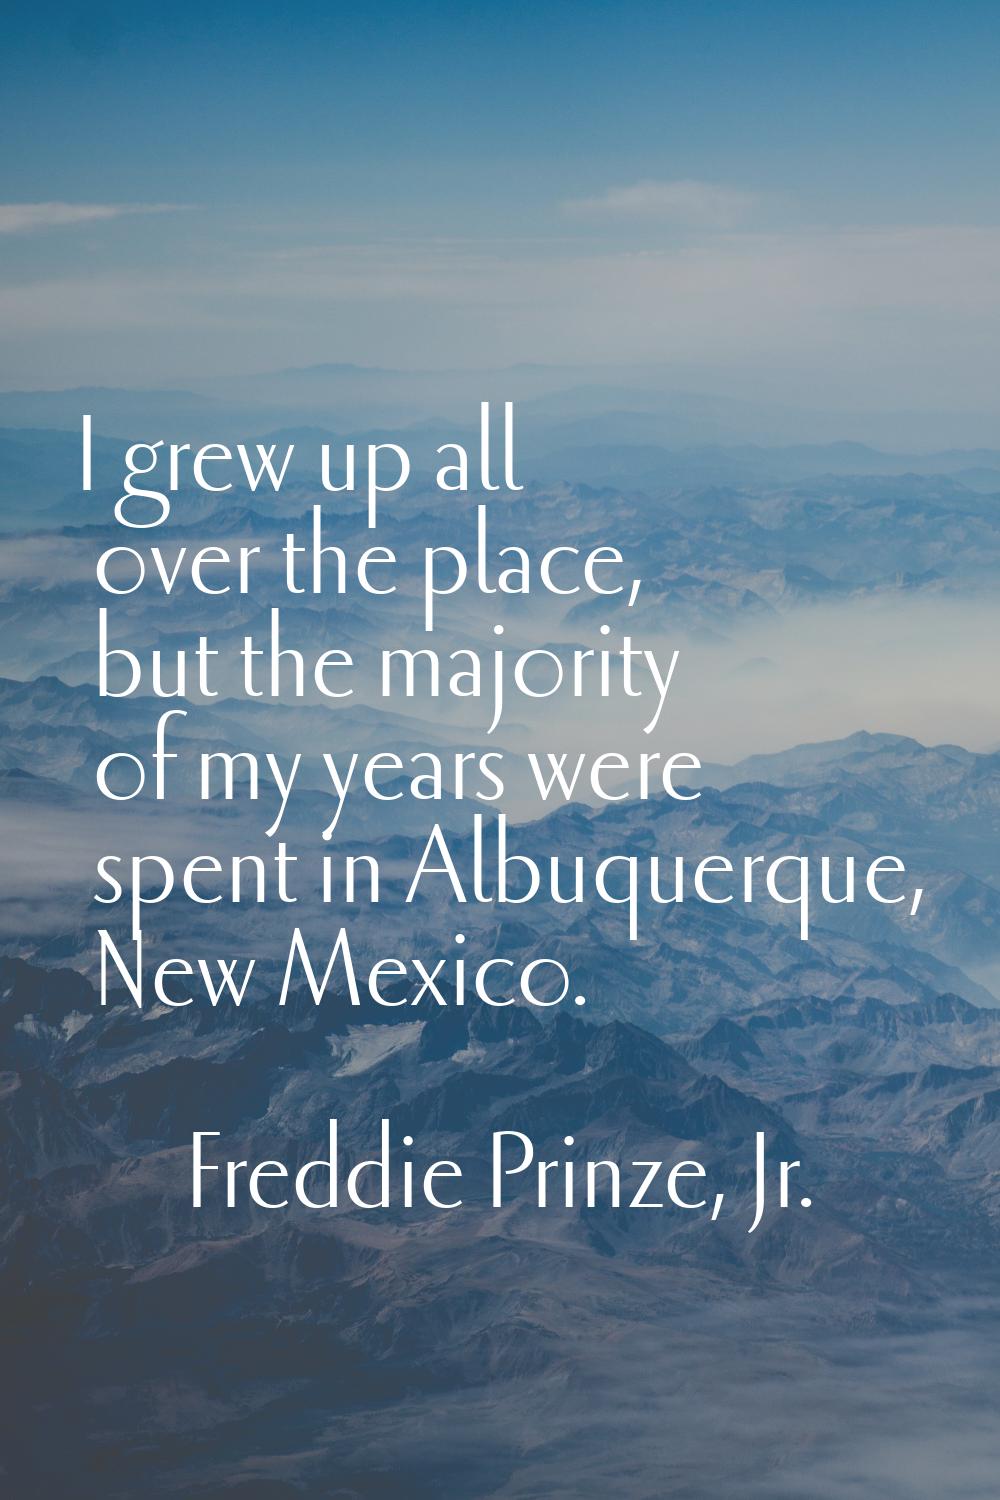 I grew up all over the place, but the majority of my years were spent in Albuquerque, New Mexico.